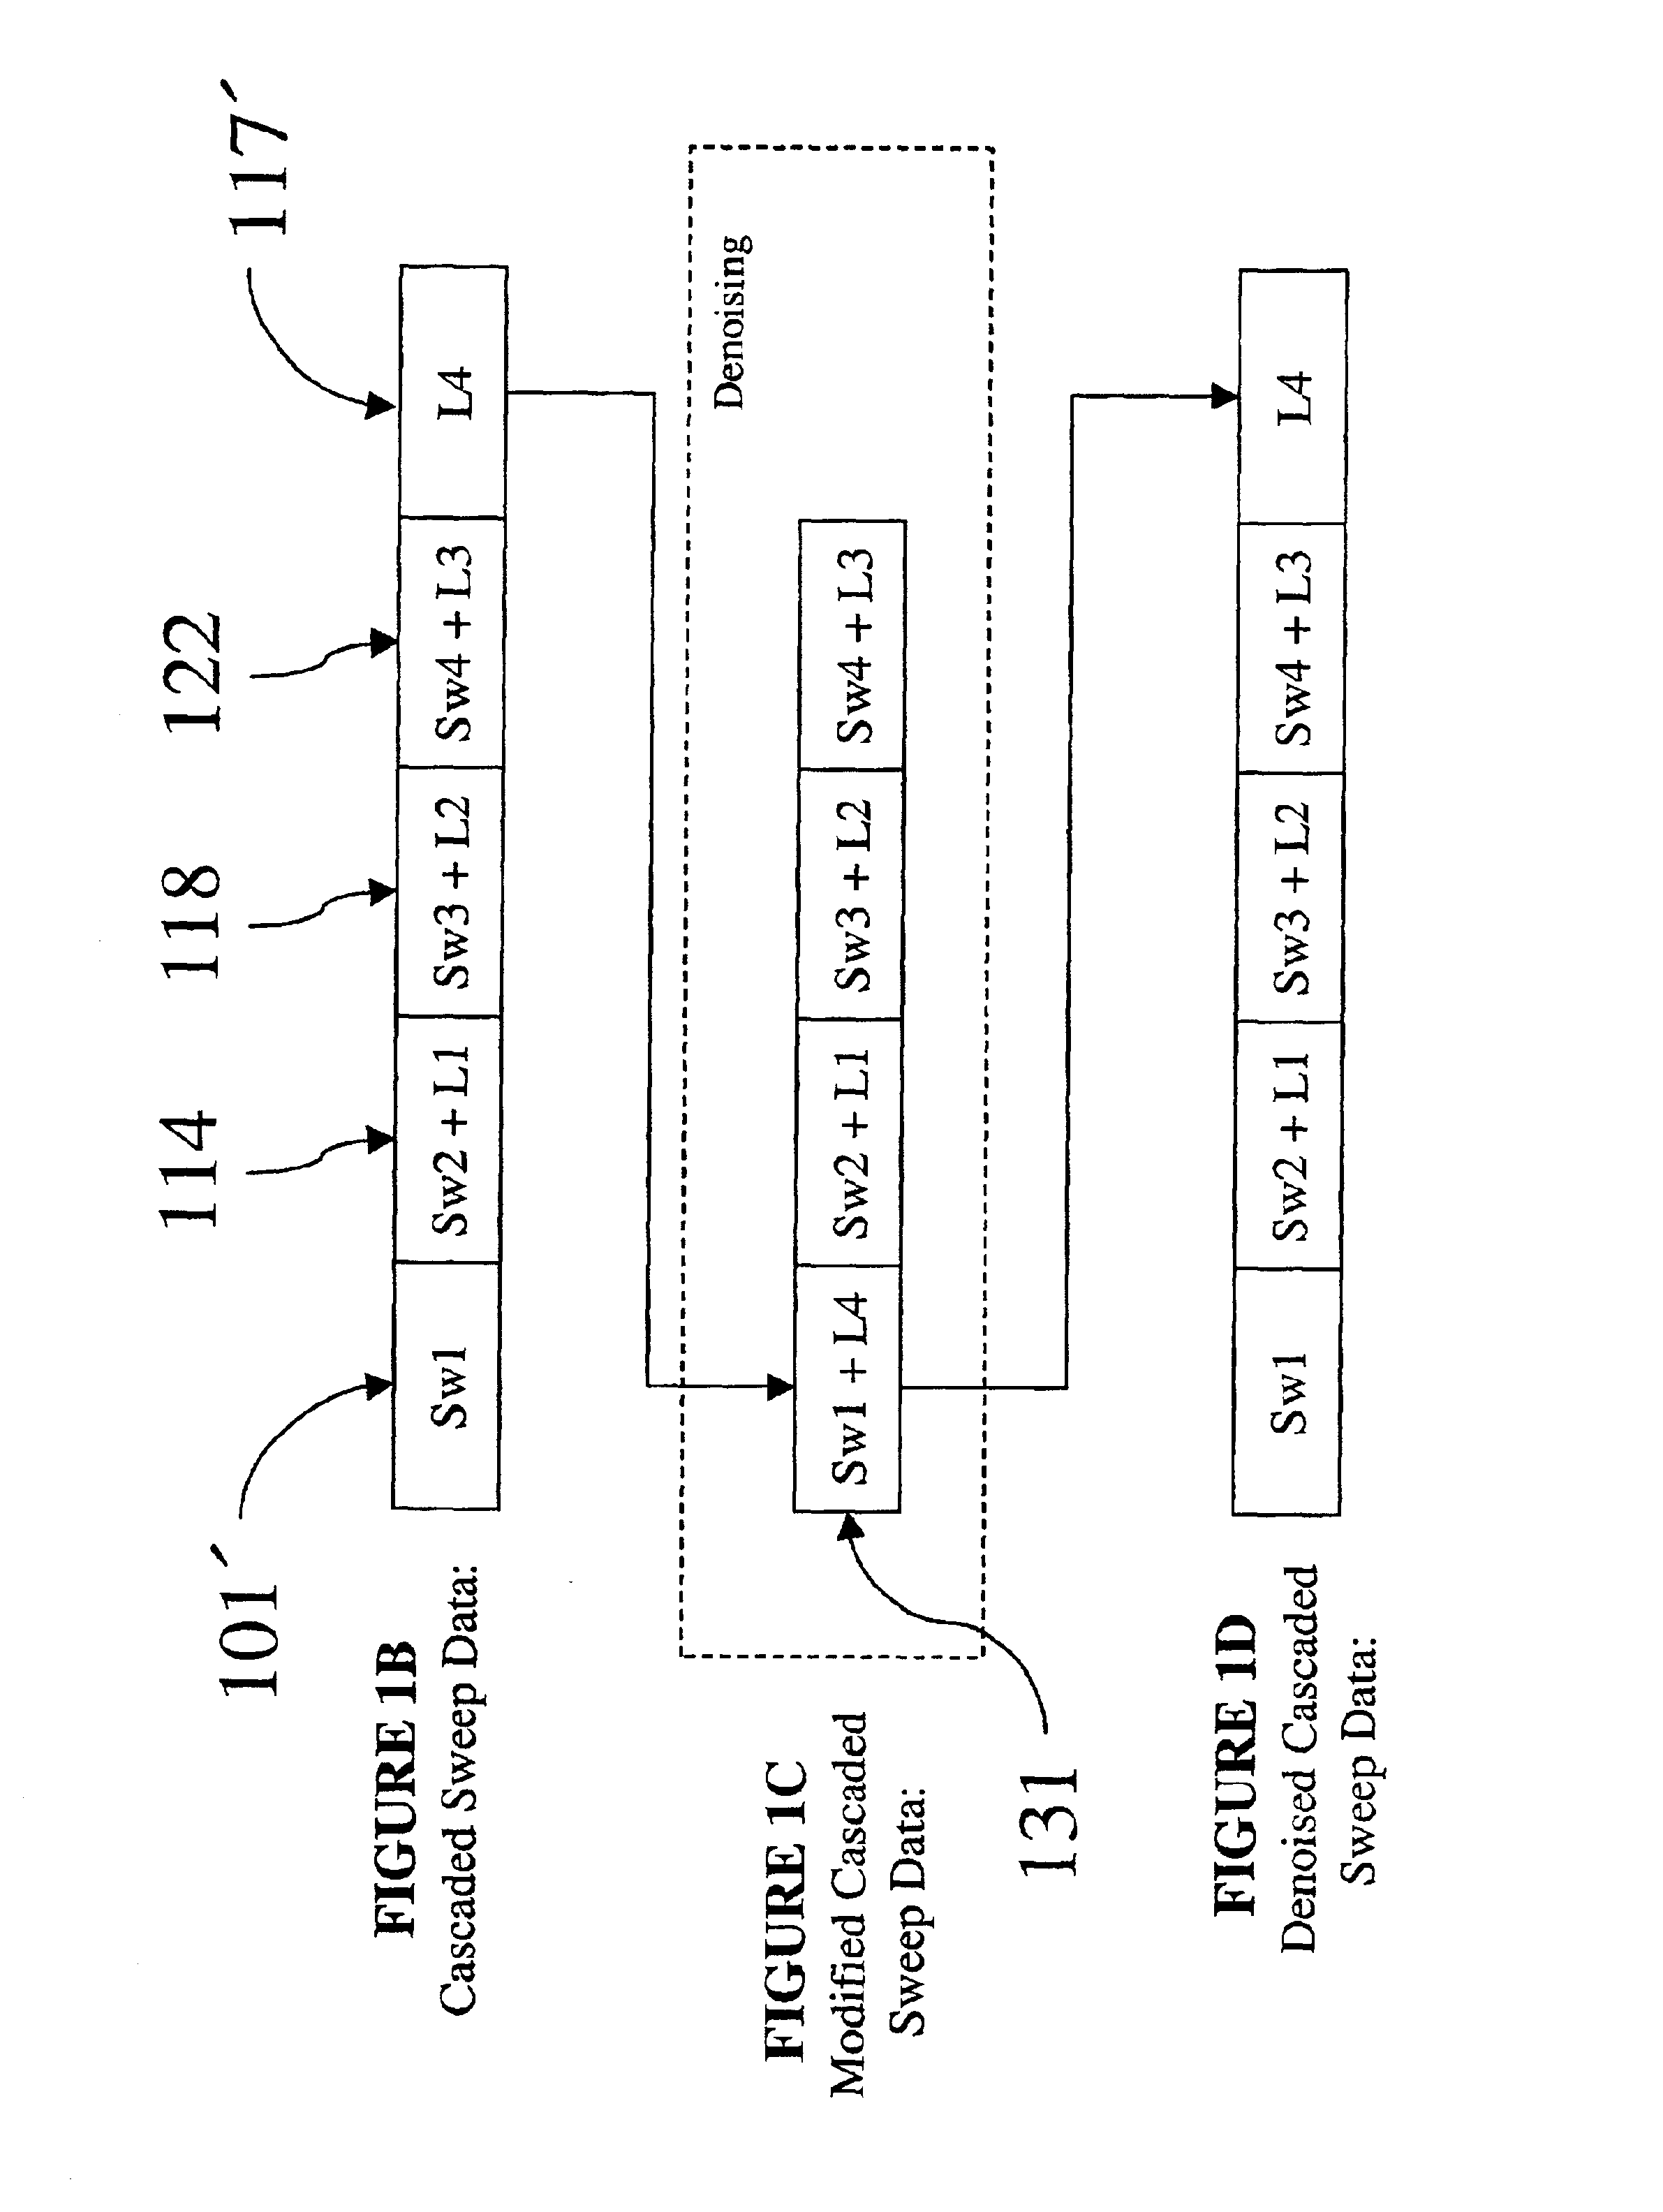 Method of noise removal for cascaded sweep data